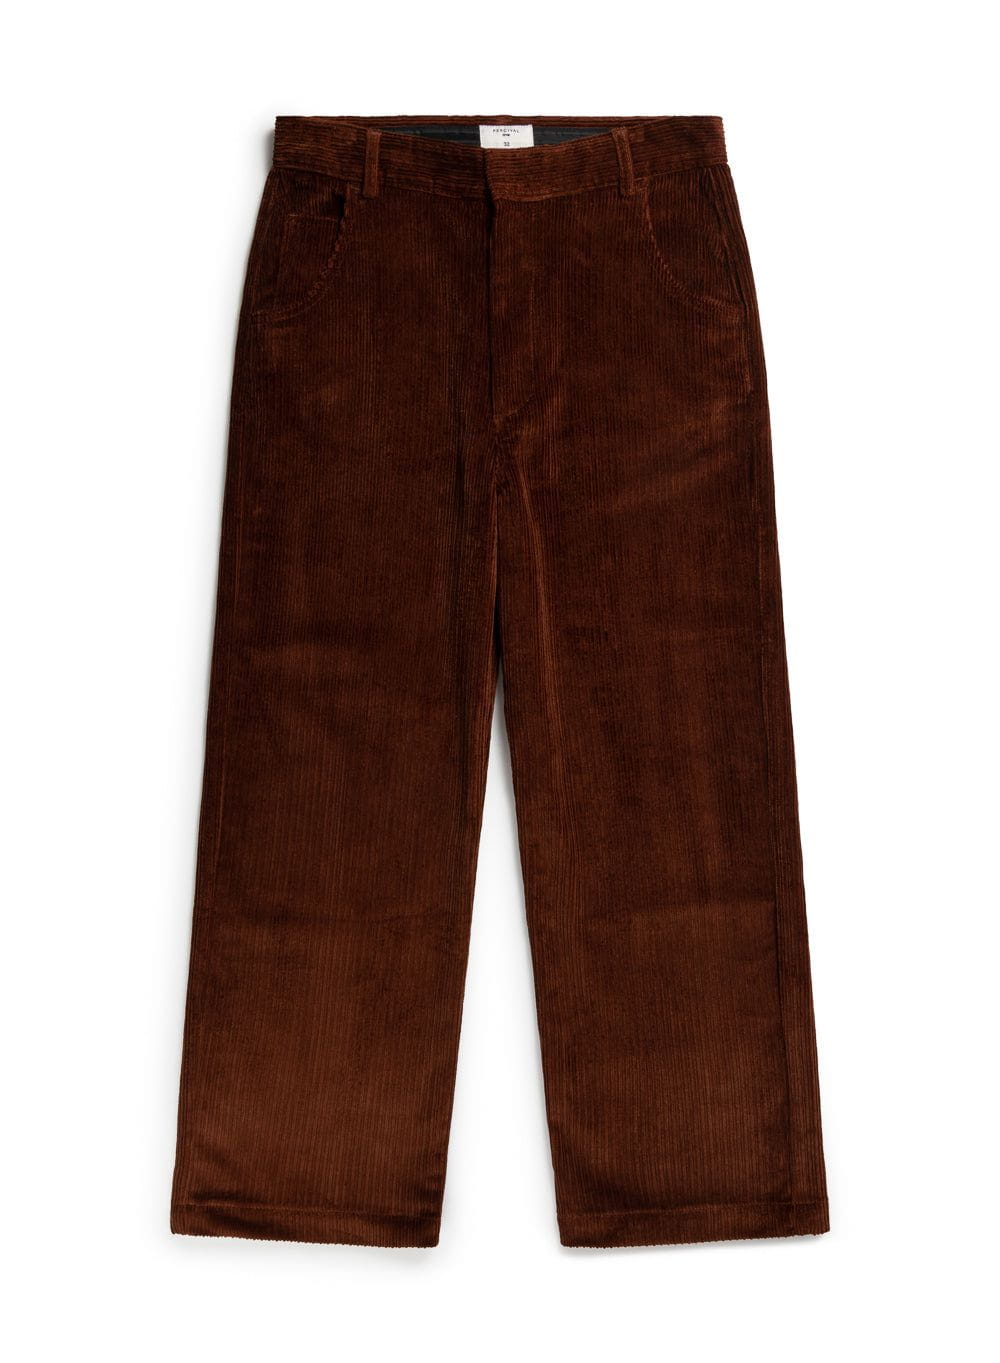 Corduroy Trousers for Babies - brown medium solid, Baby